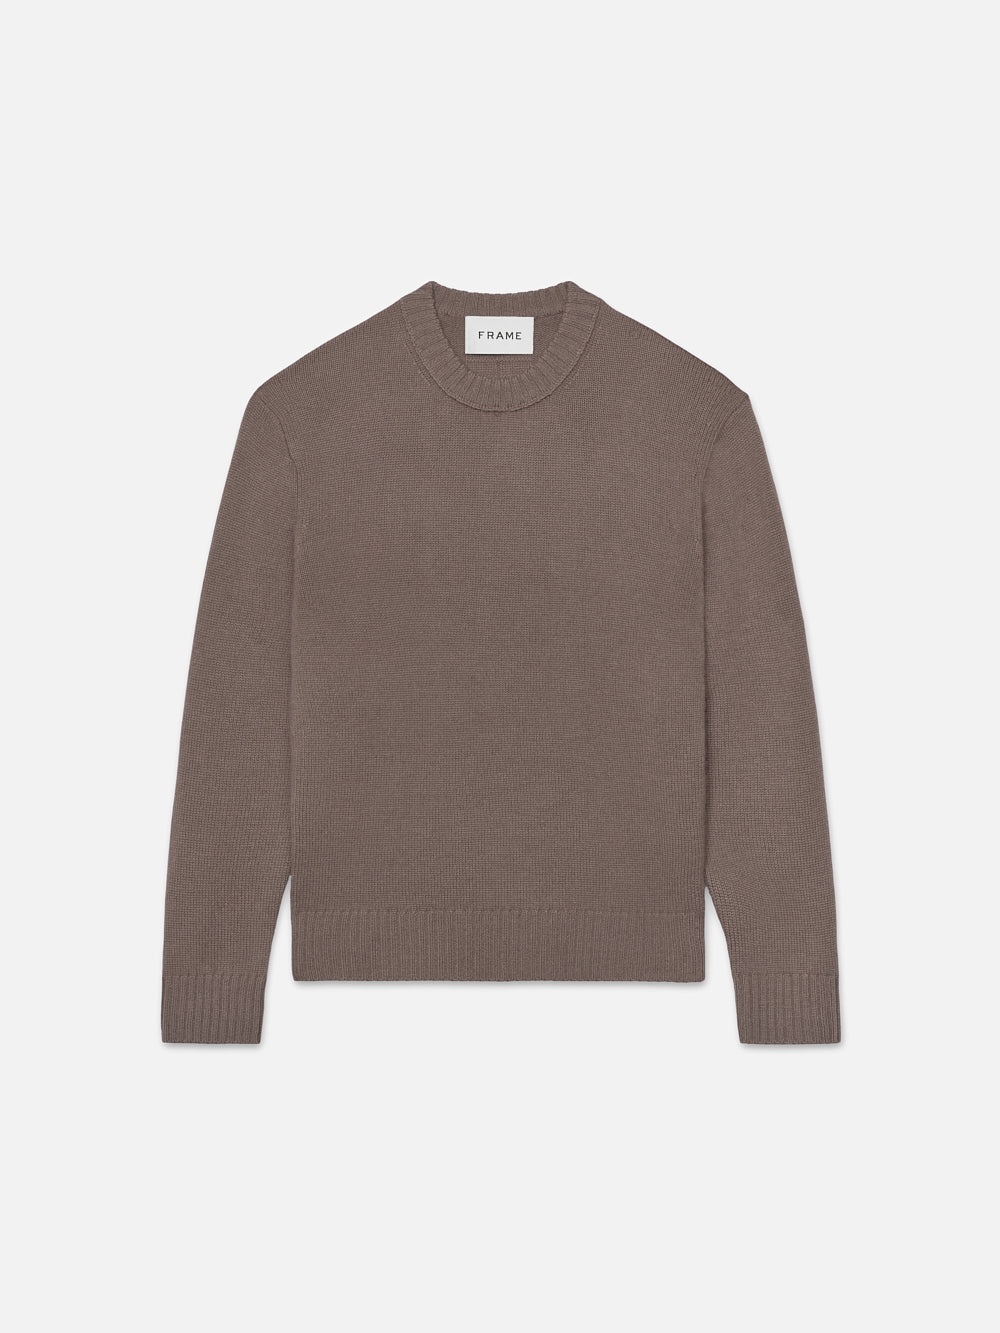 The Cashmere Crewneck Sweater in Dry Rose - 1